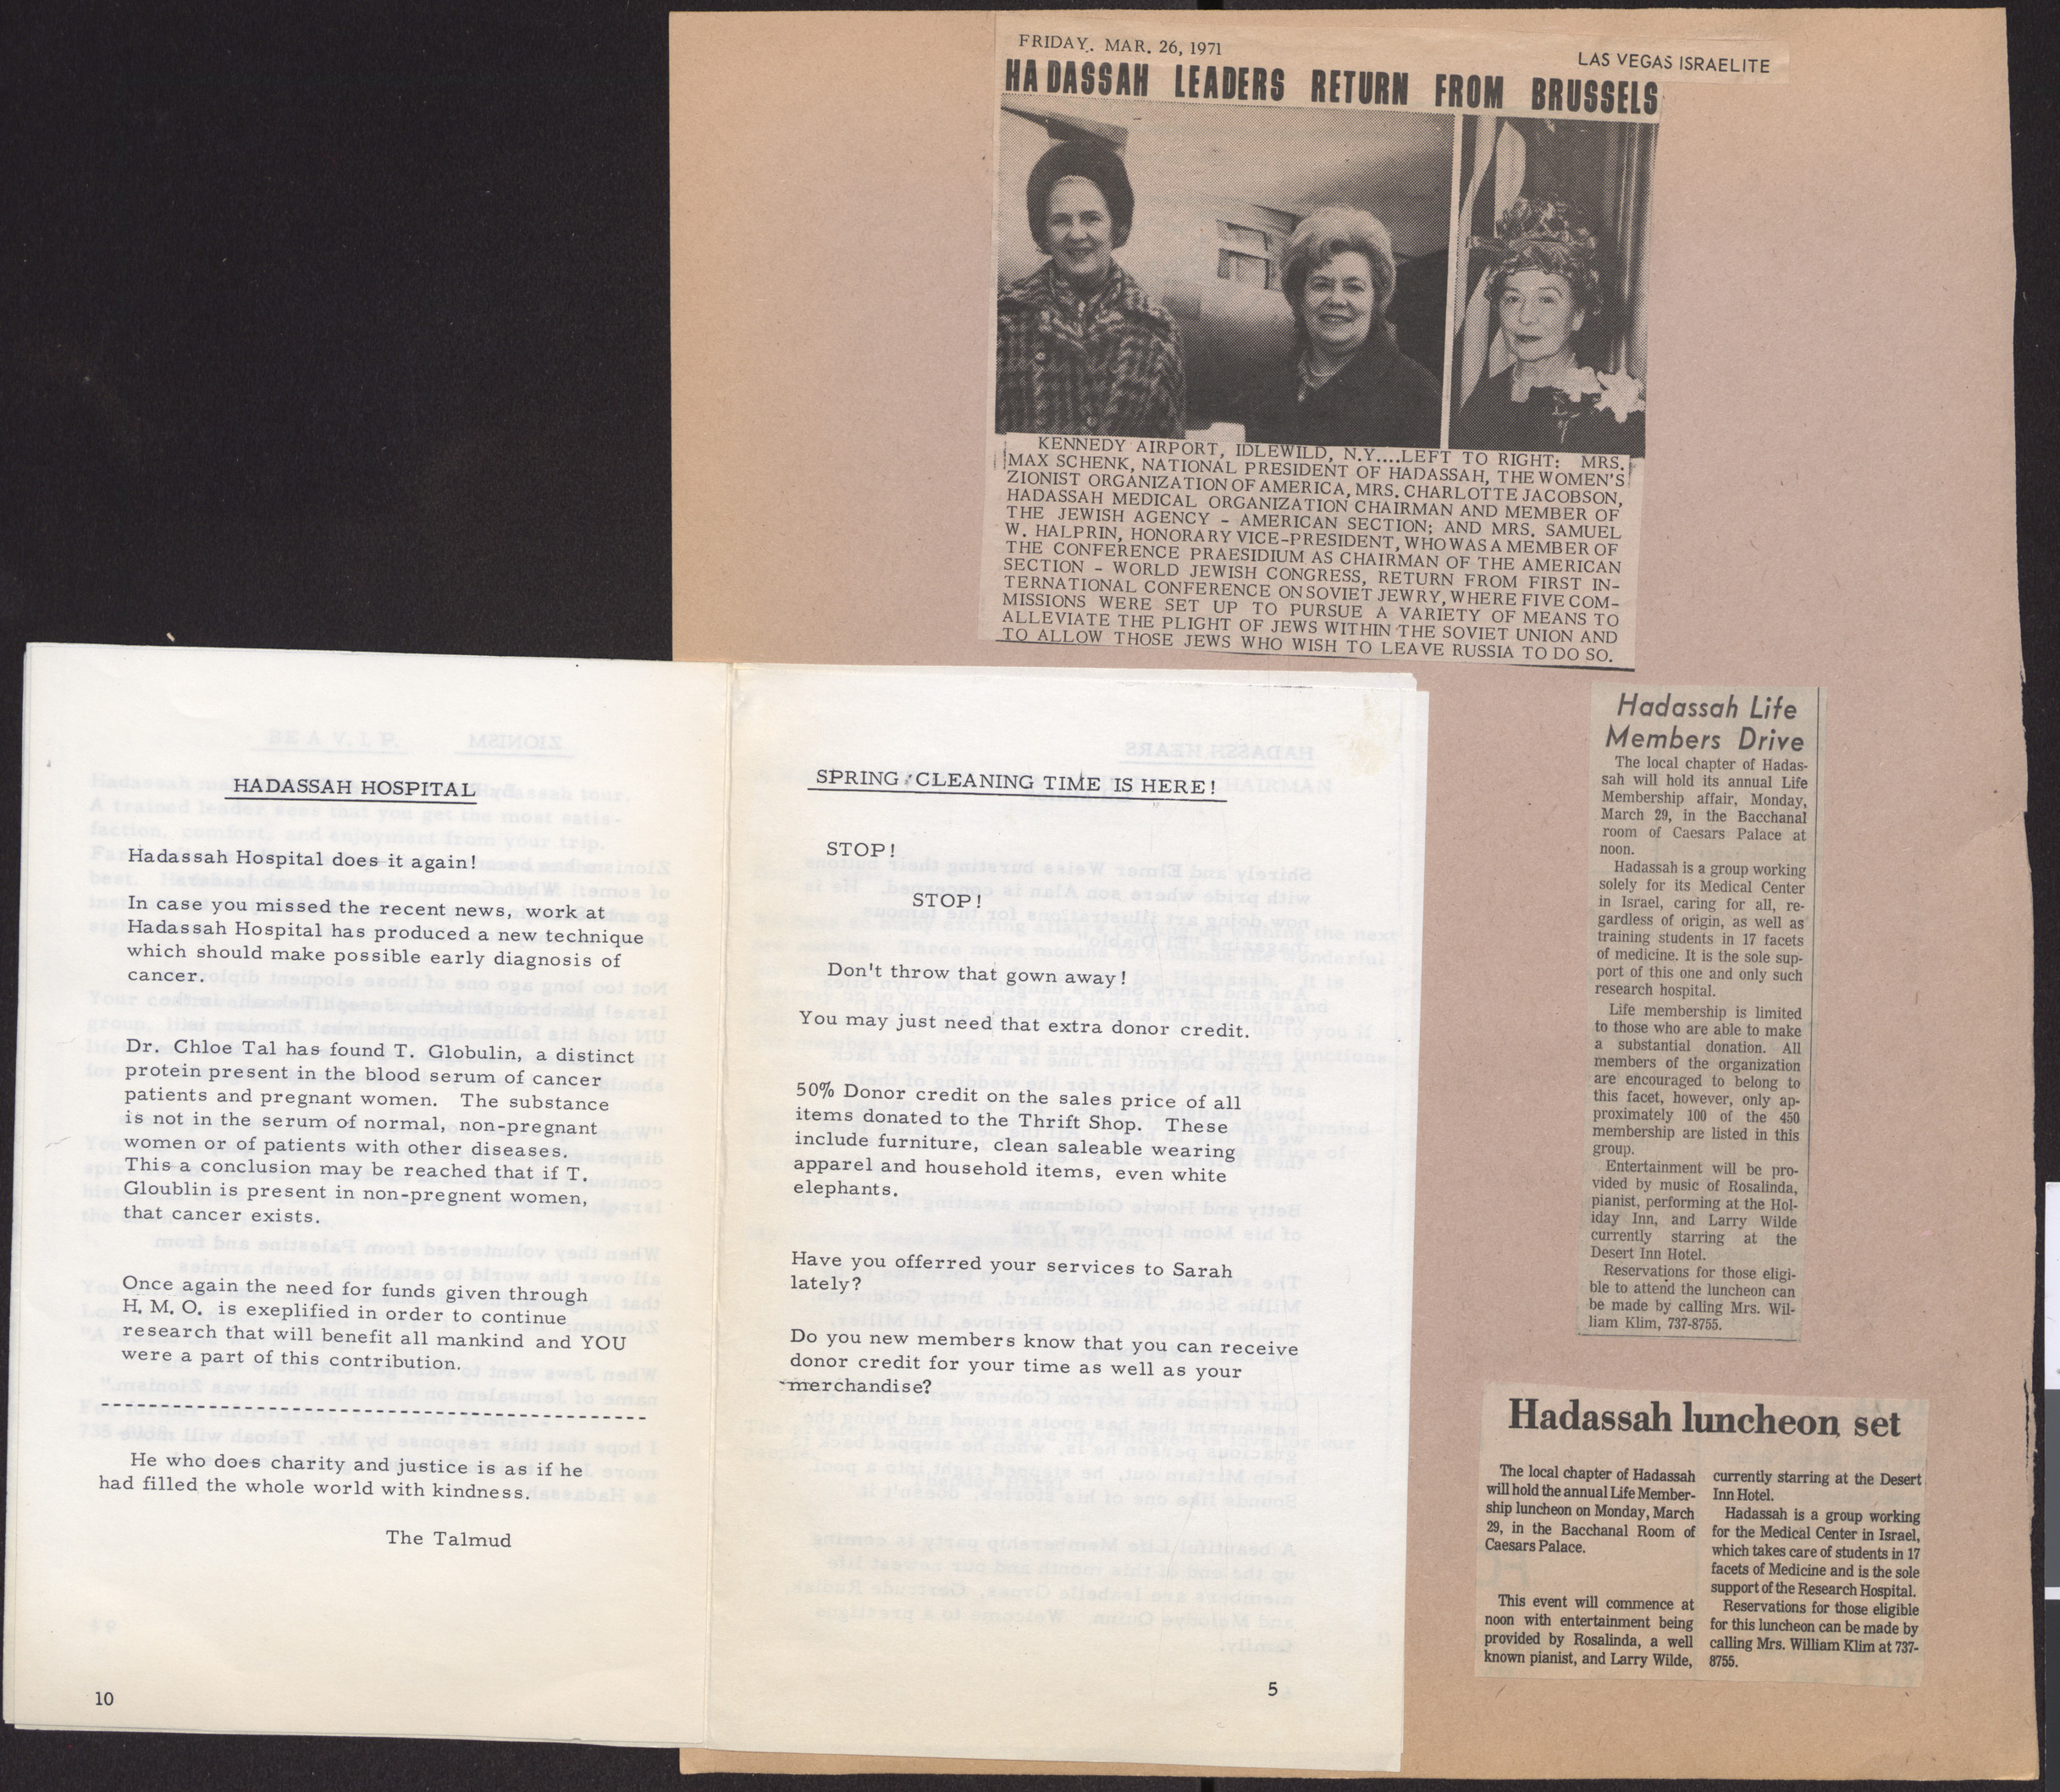 Hadassah newsletter, March 1971, pages 10 and 5